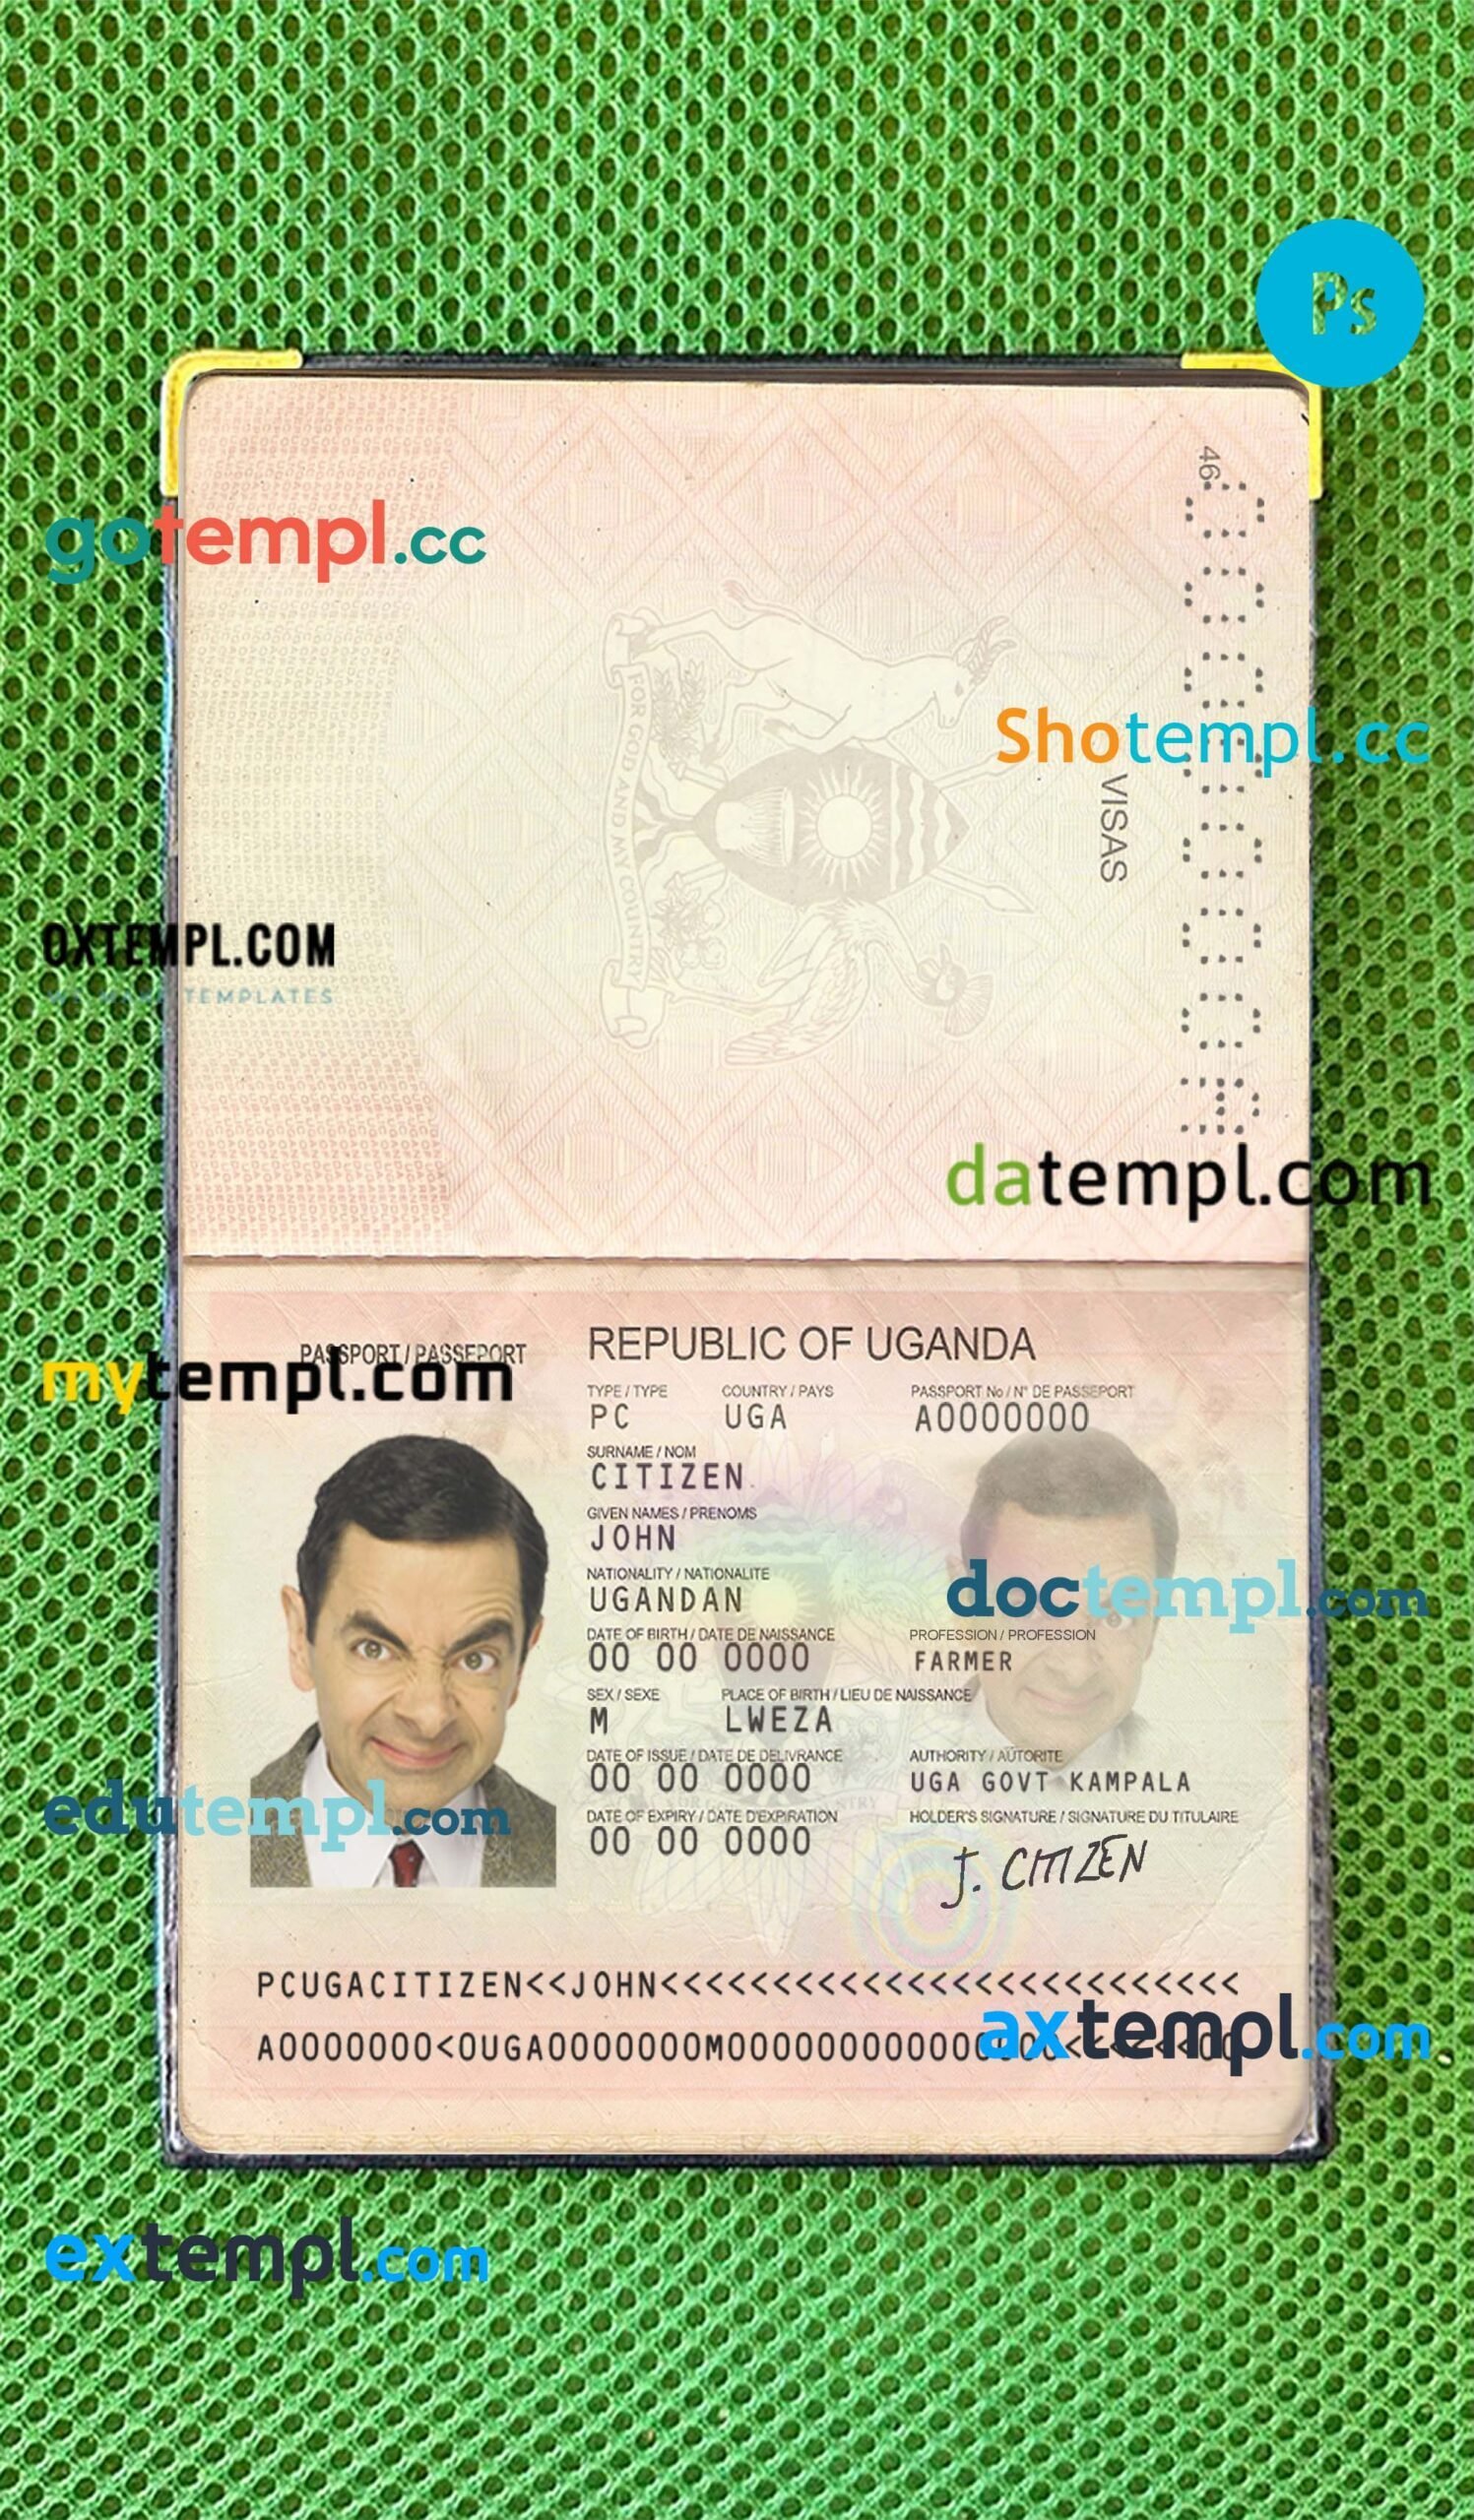 France passport psd files, editable scan and snapshot sample, 2 in 1